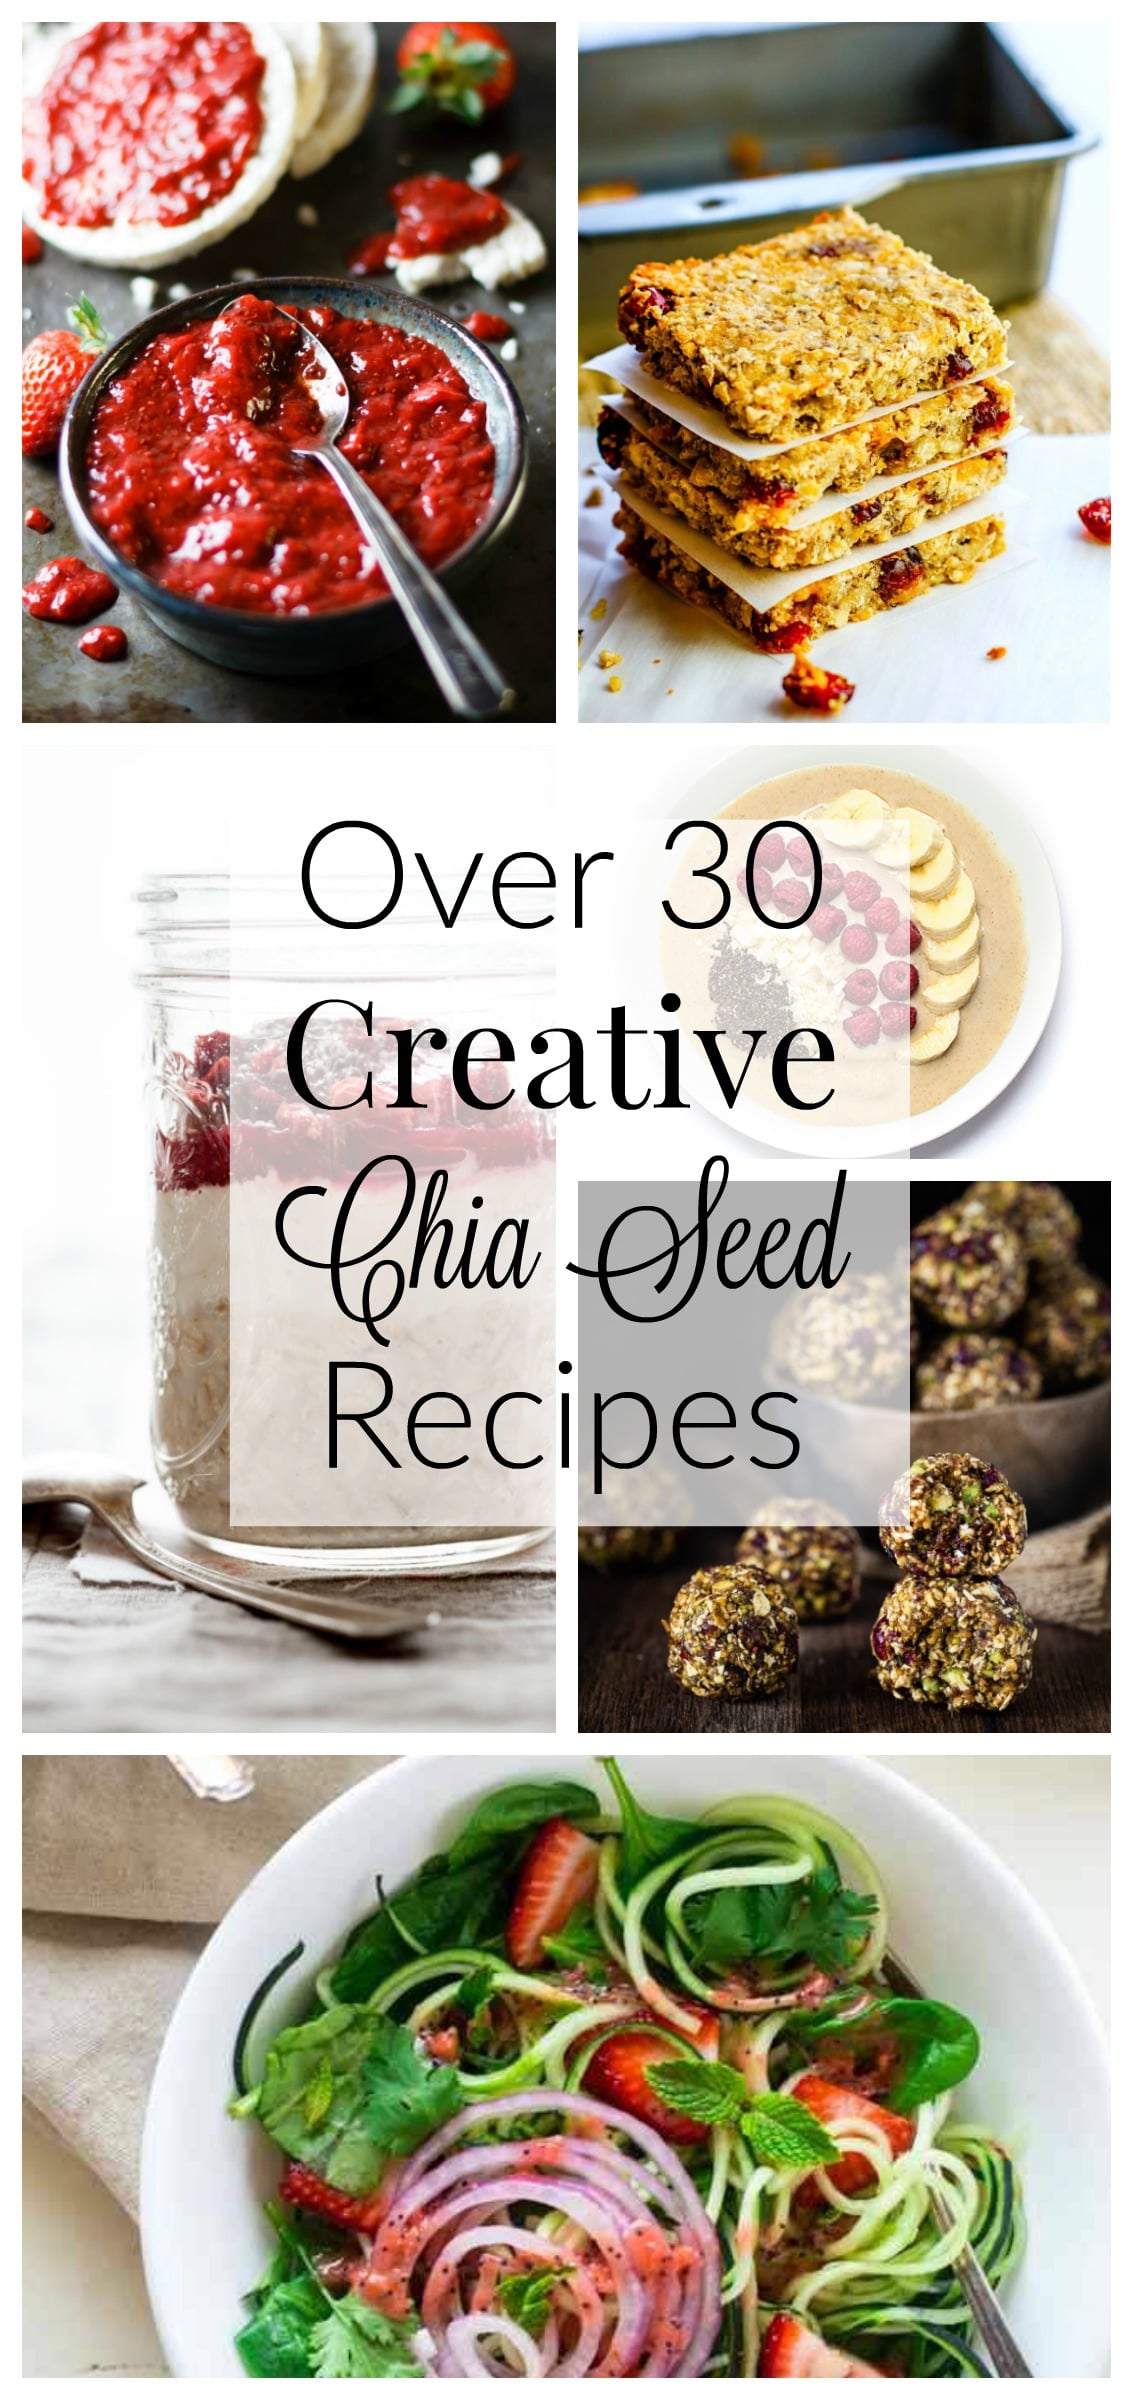 Over 30 Creative Chia Seed Recipes from Lauren Kelly Nutrition